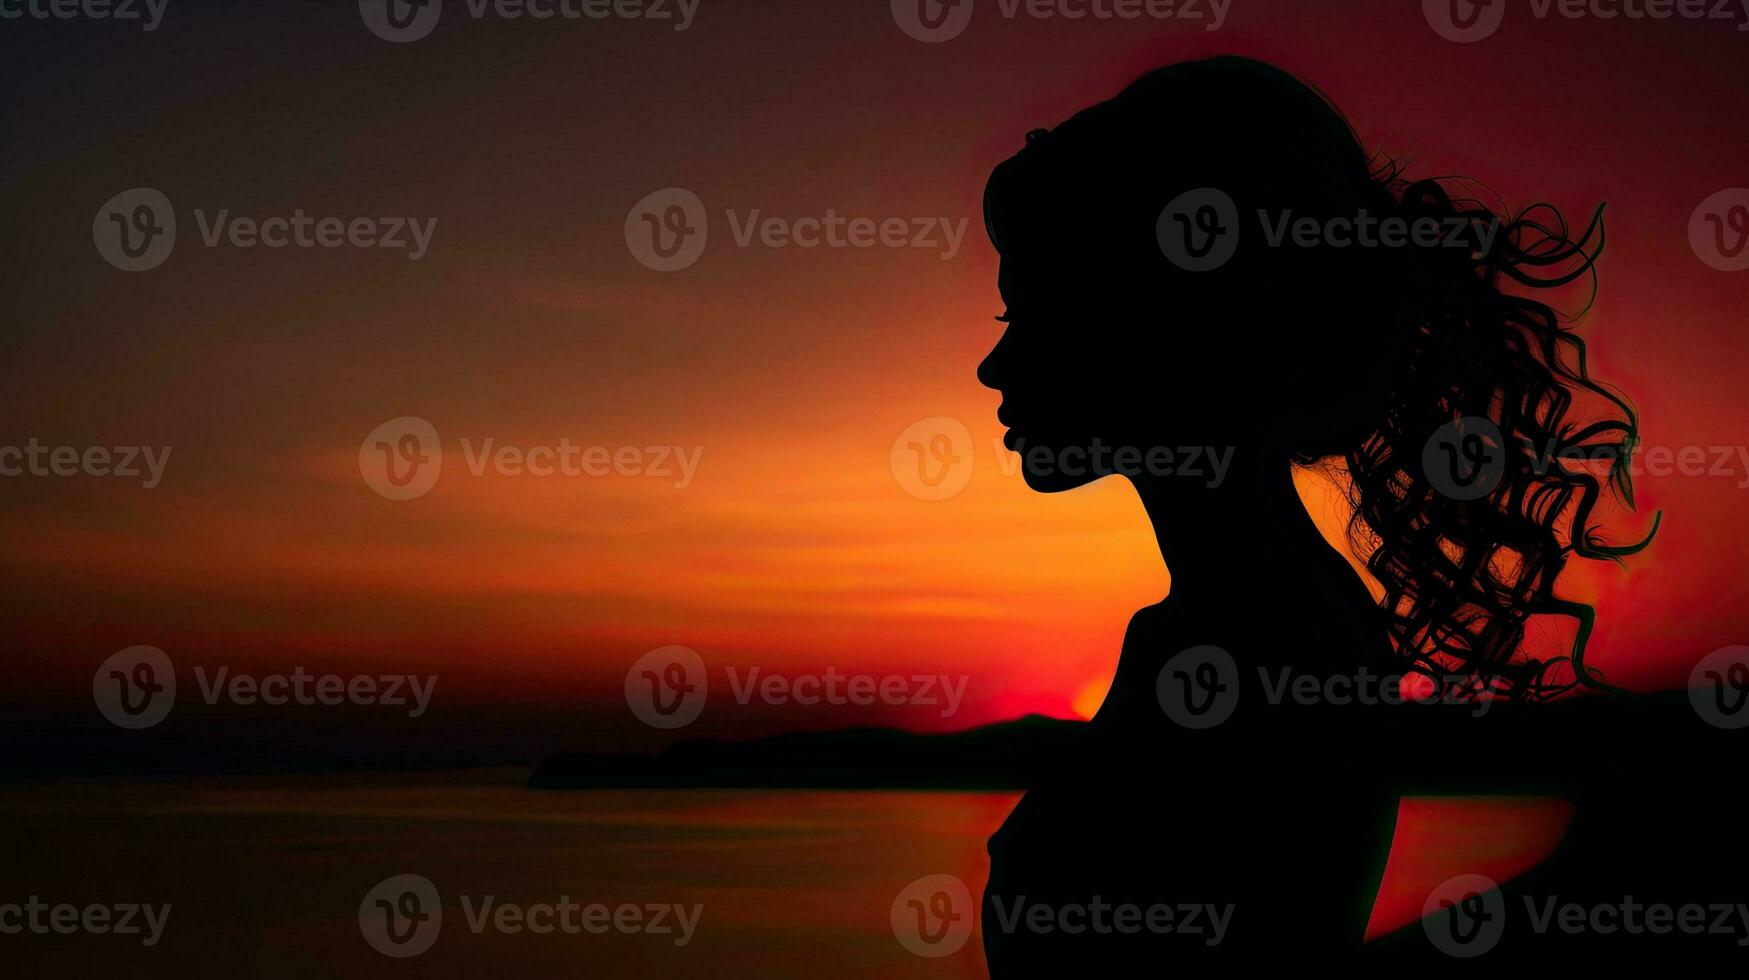 Appreciating the Sunset Woman s Silhouette at Nightfall photo